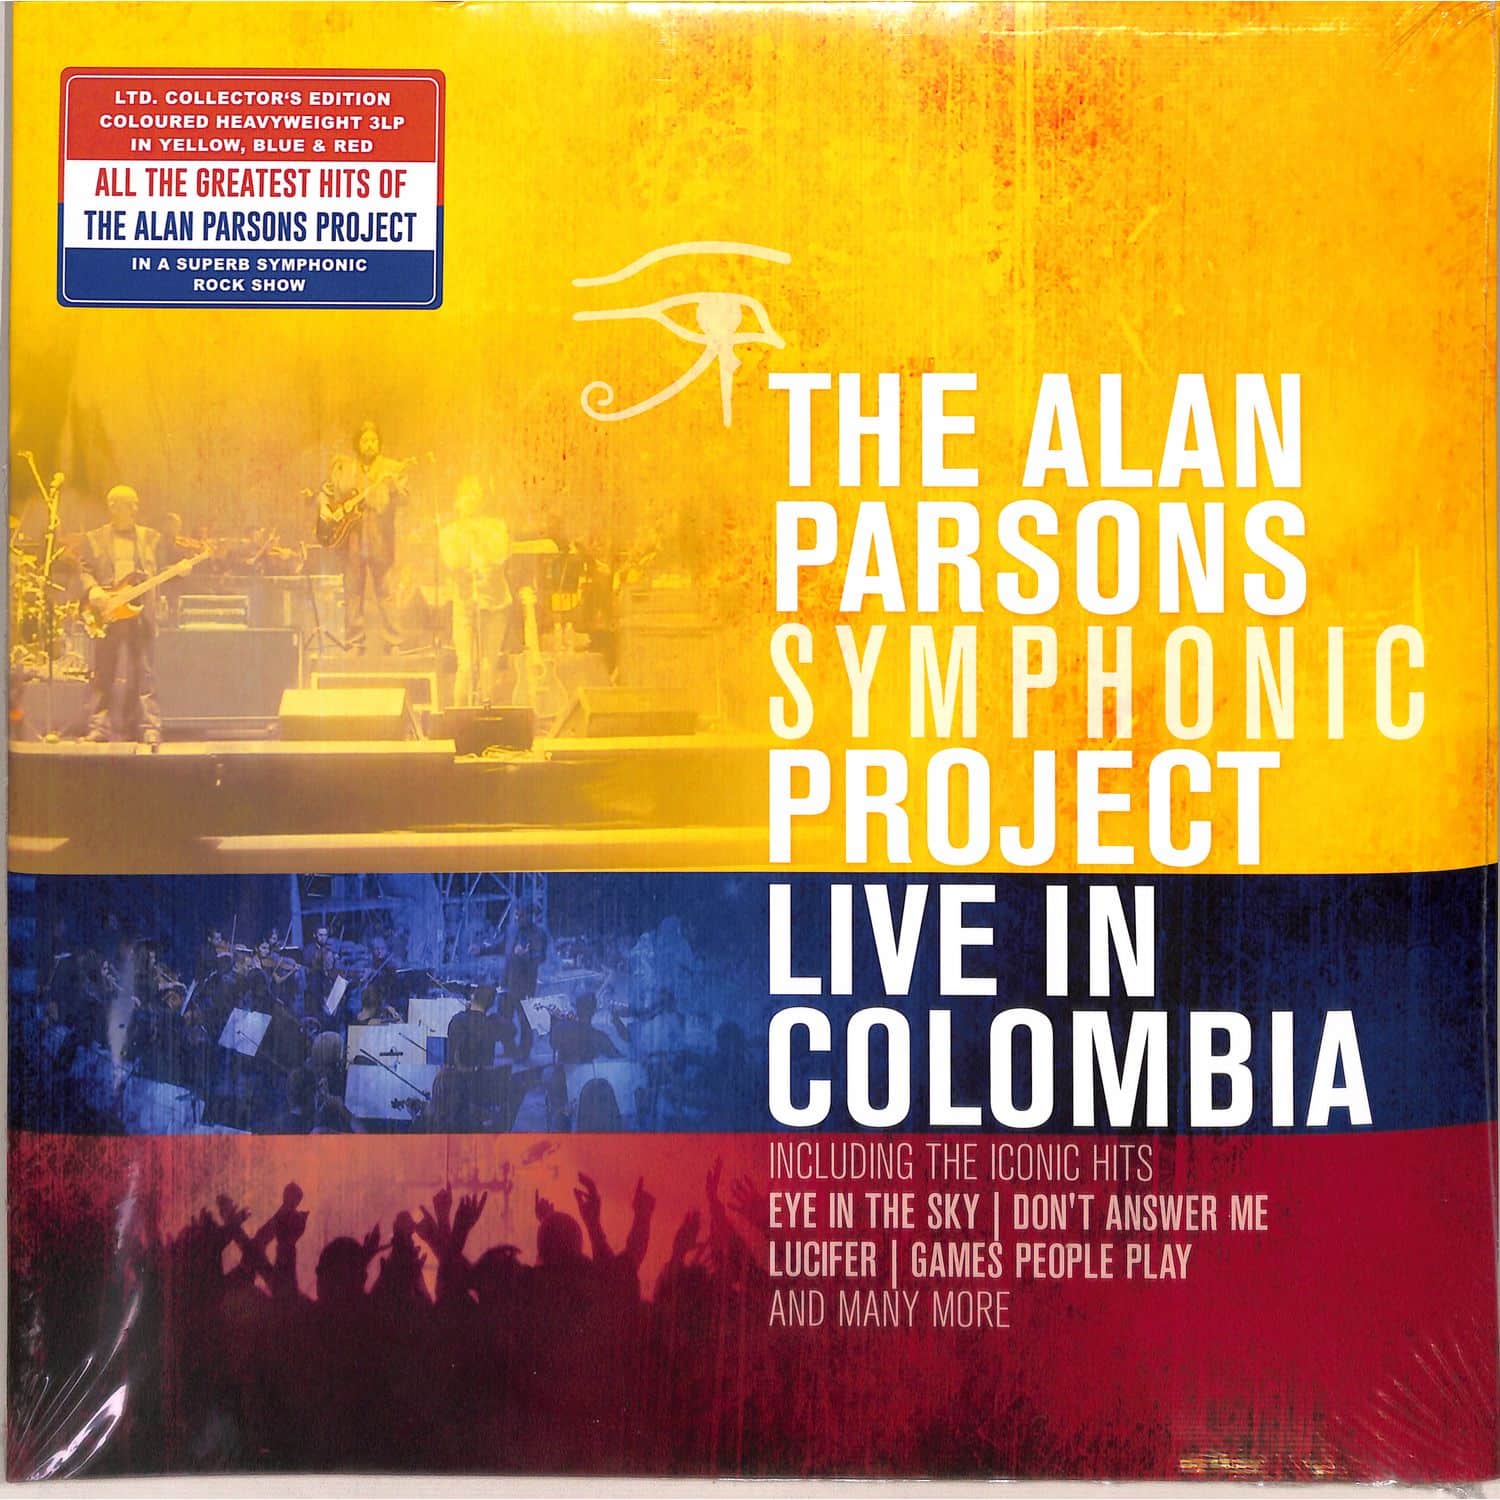 The Alan Parsons Symphonic Project - LIVE IN COLOMBIA 